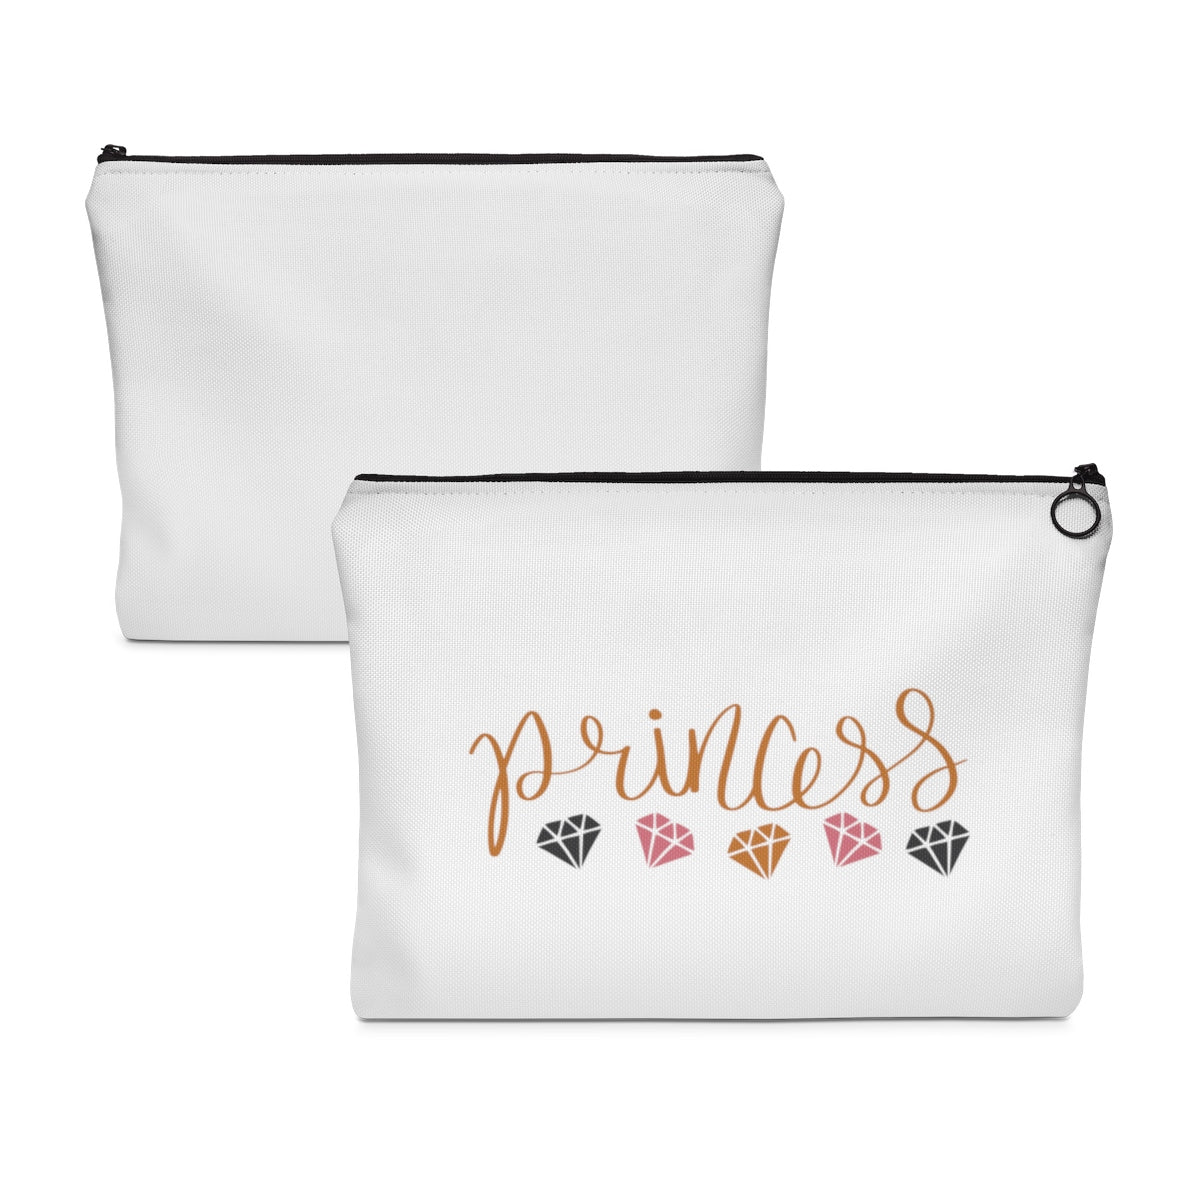 Princess Carry All Pouch - Flat - Inspired By Savy